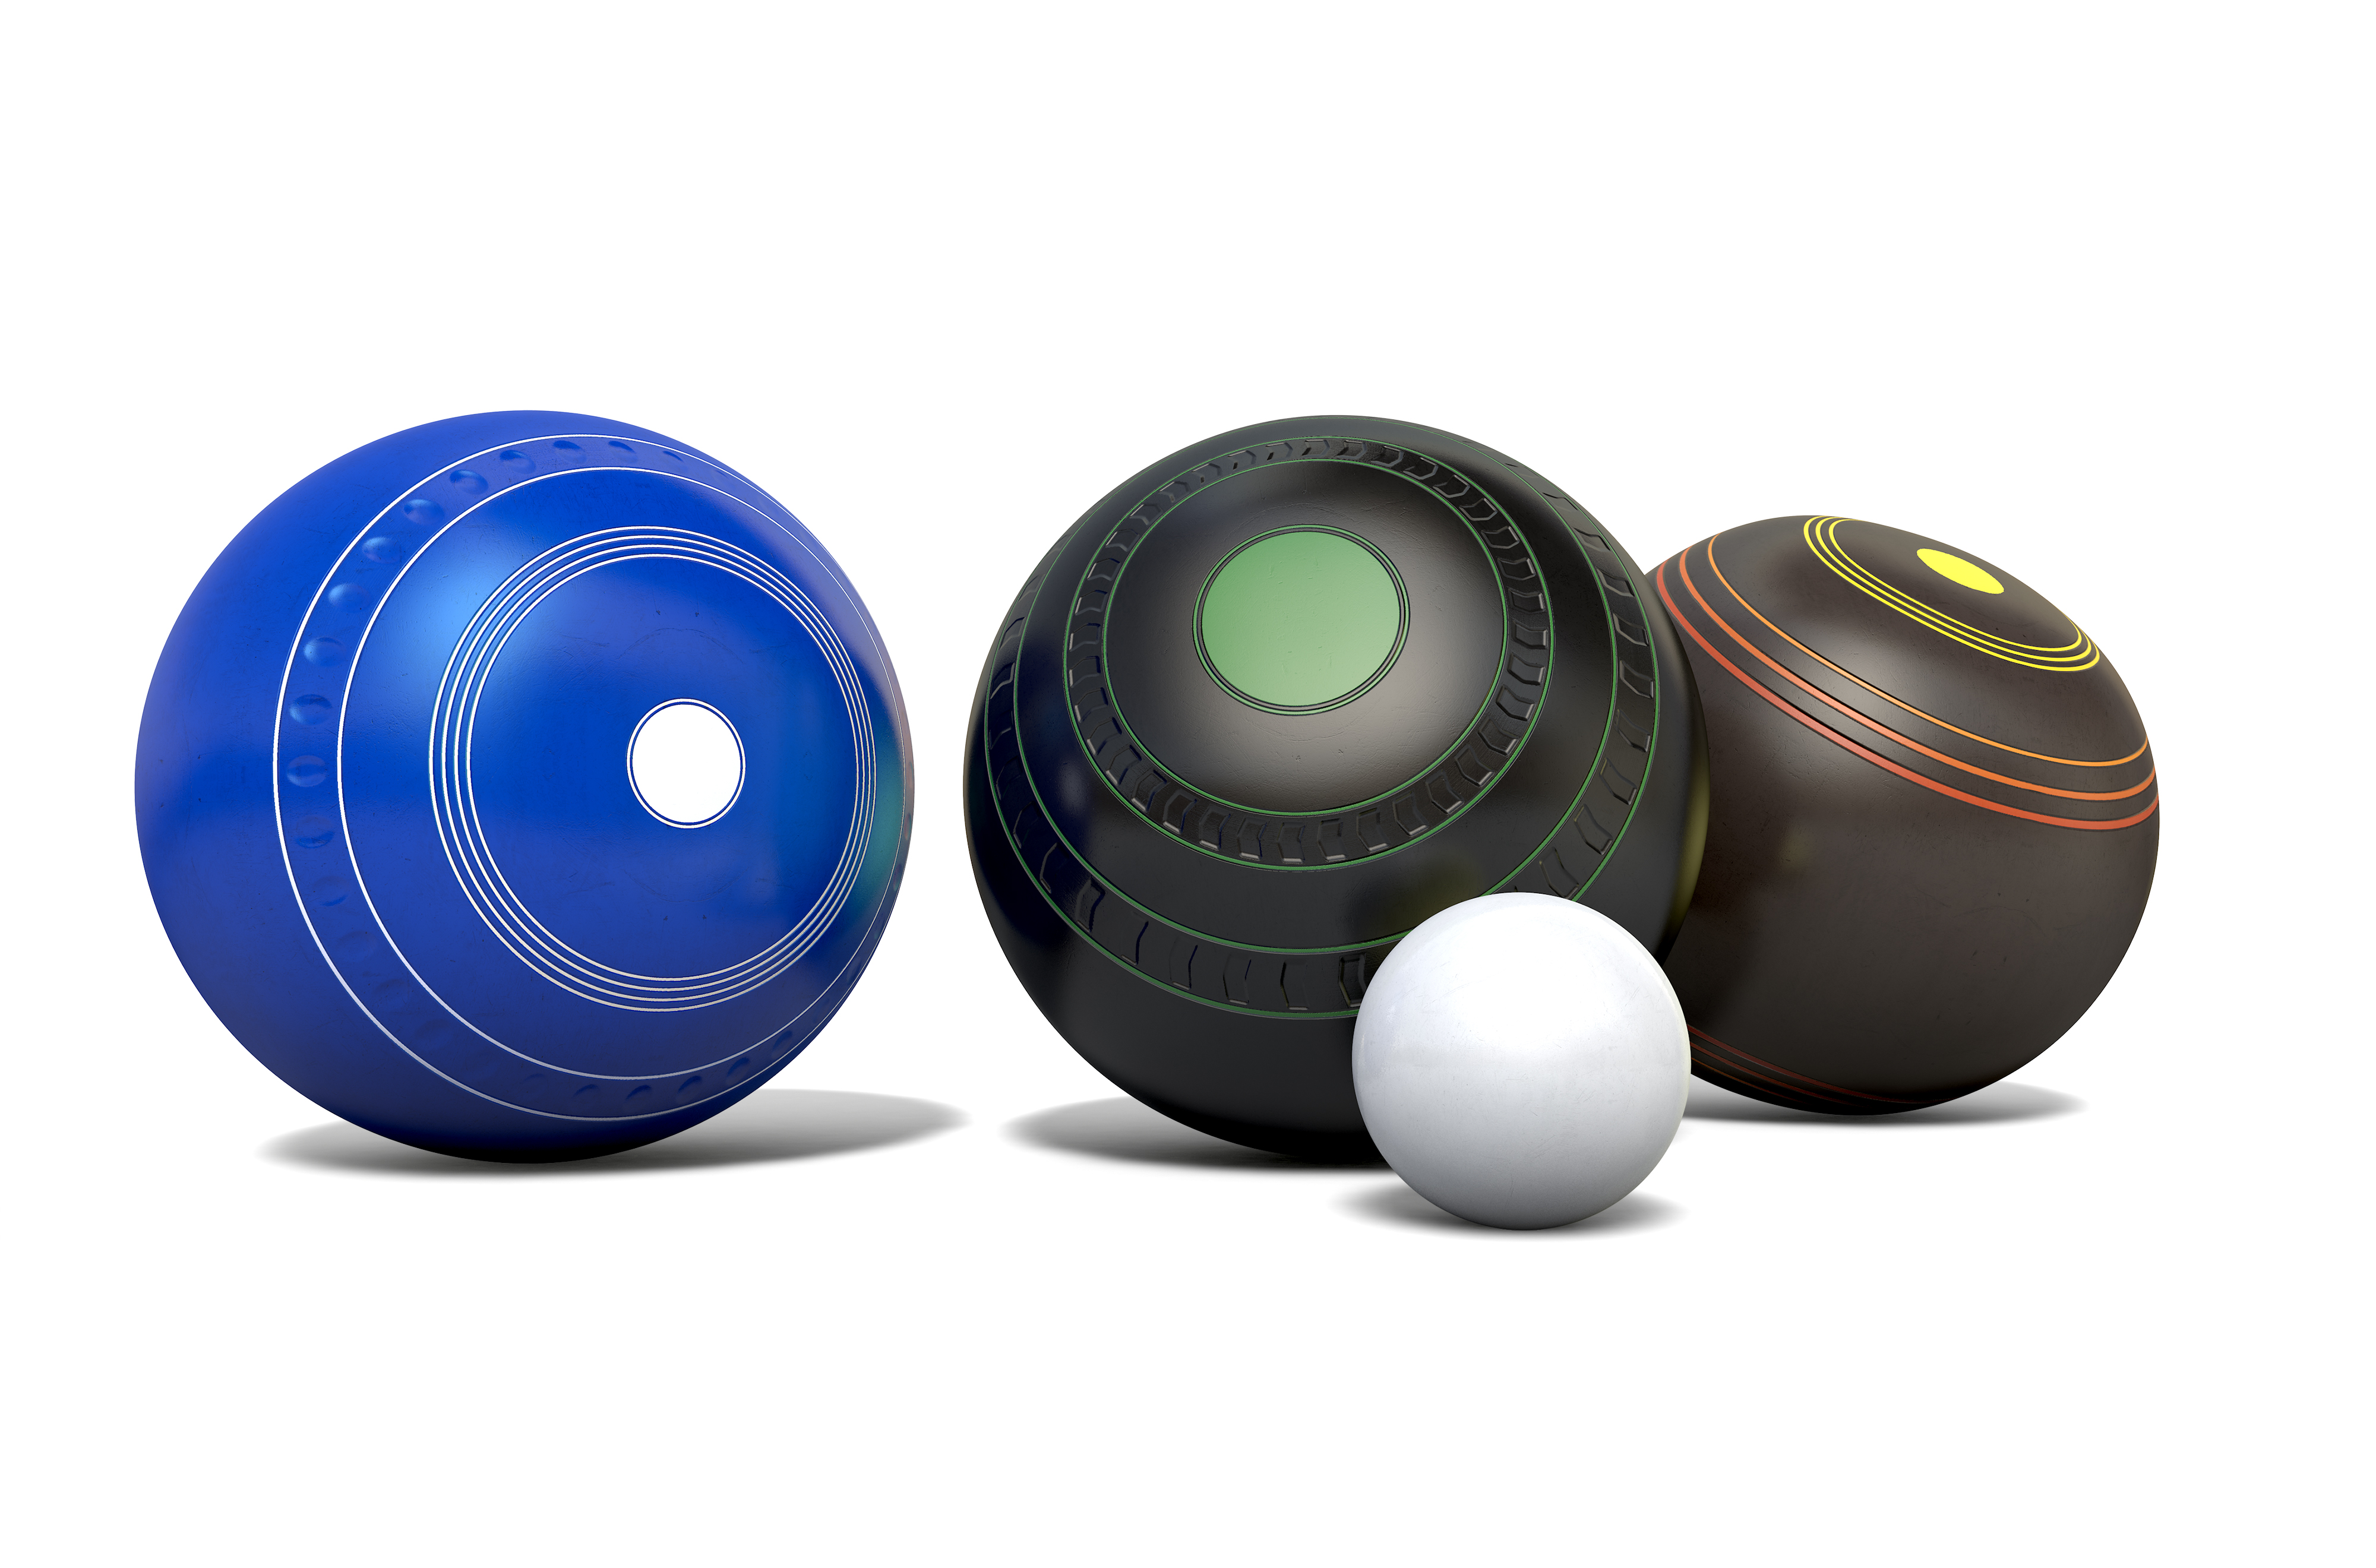 Three different designs of lawn bowling balls surrounding a white jack on an isolated white studio background - 3D render